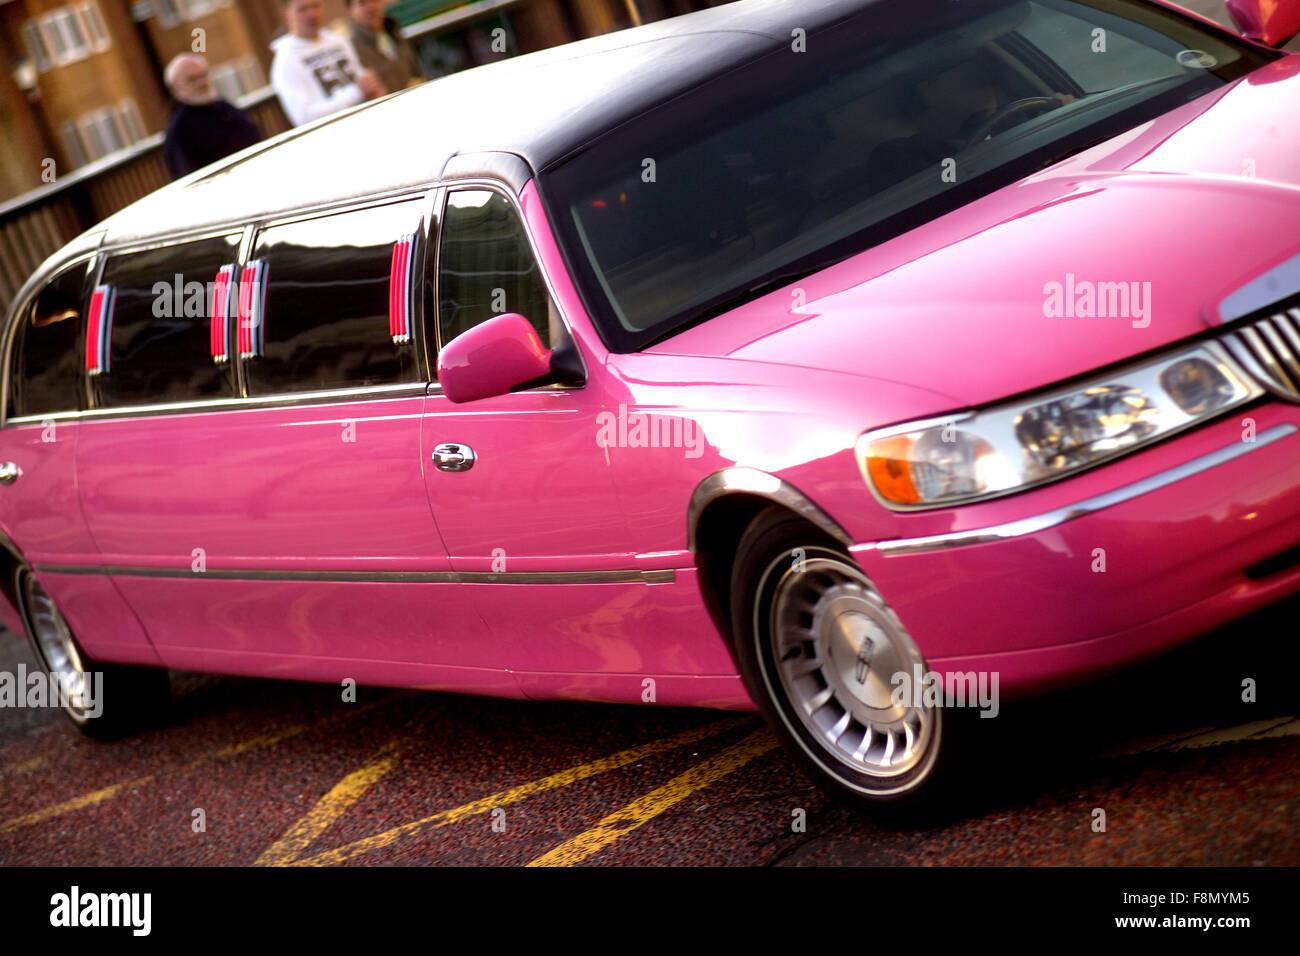 Pink stretched limo / limousine Stock Photo